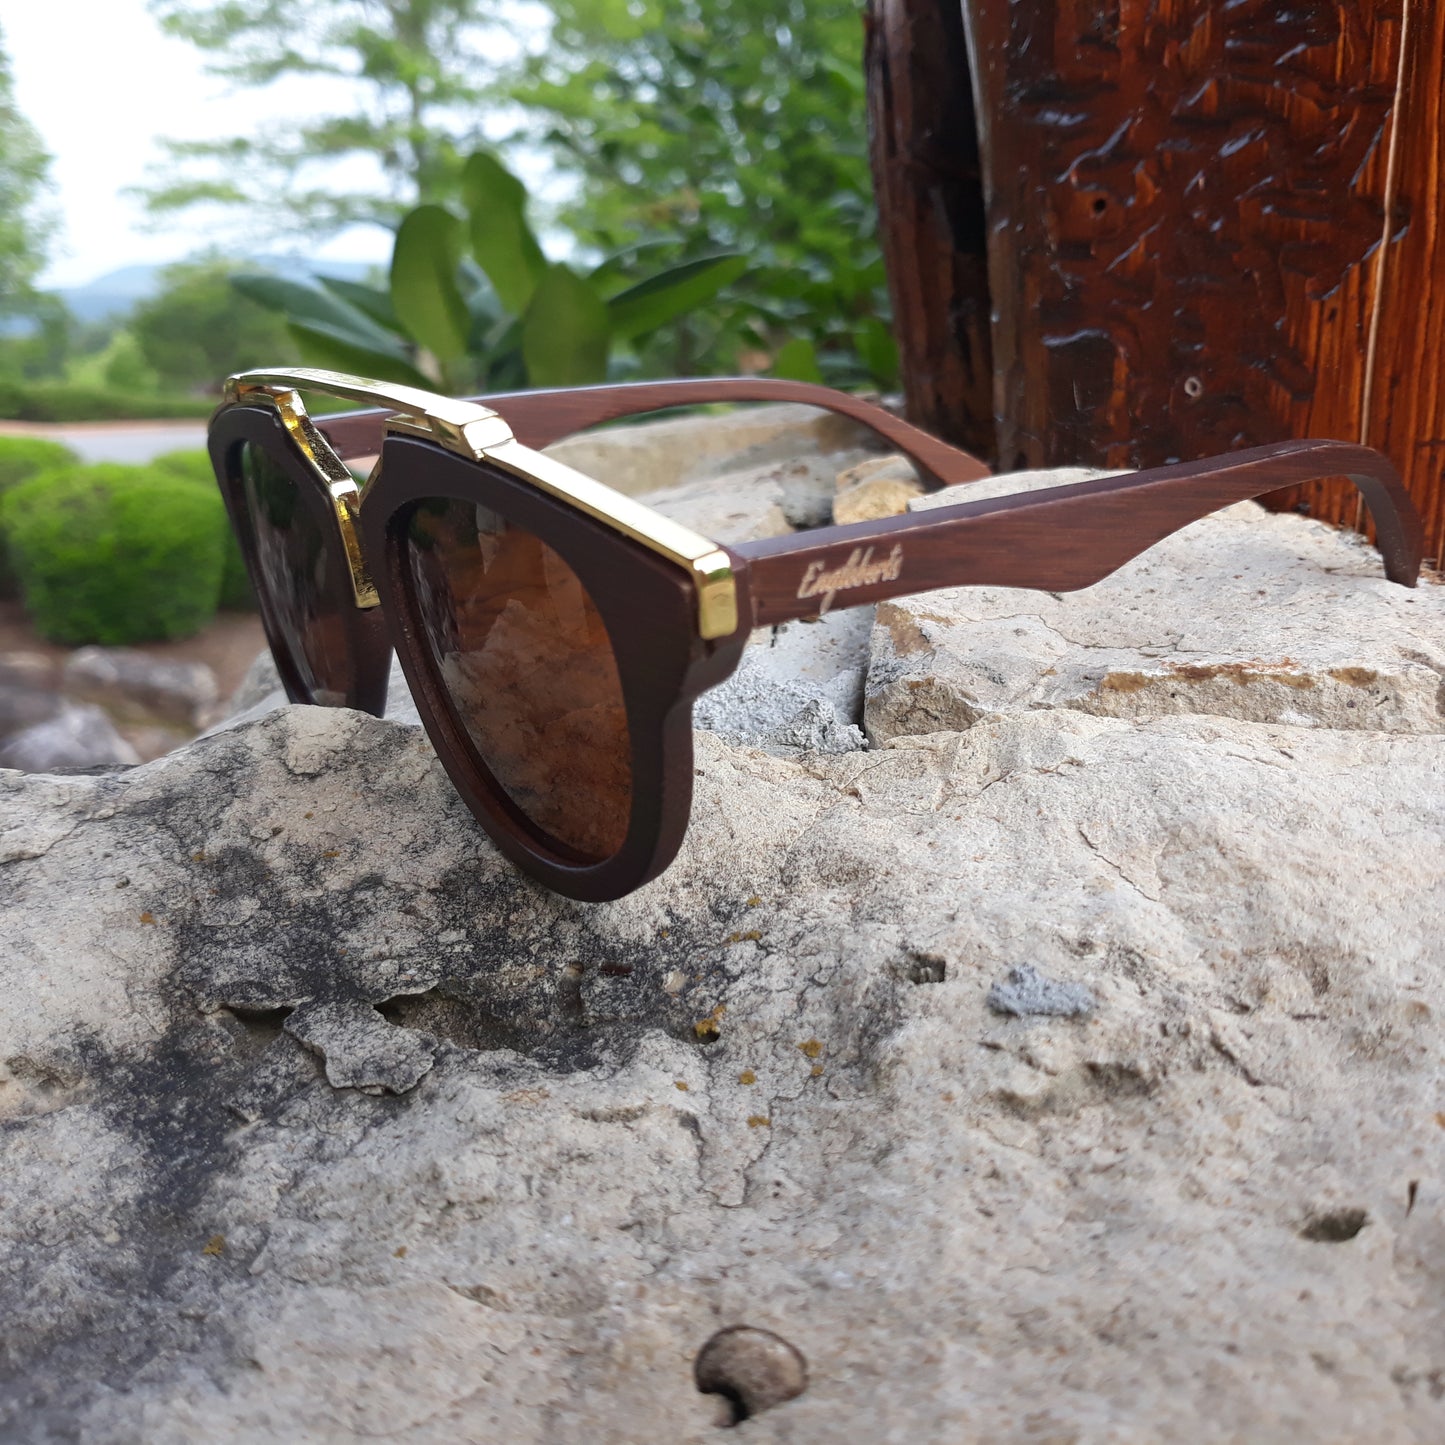 Cherry Wood Full Frame, Polarized with Gold Trim, Handcrafted